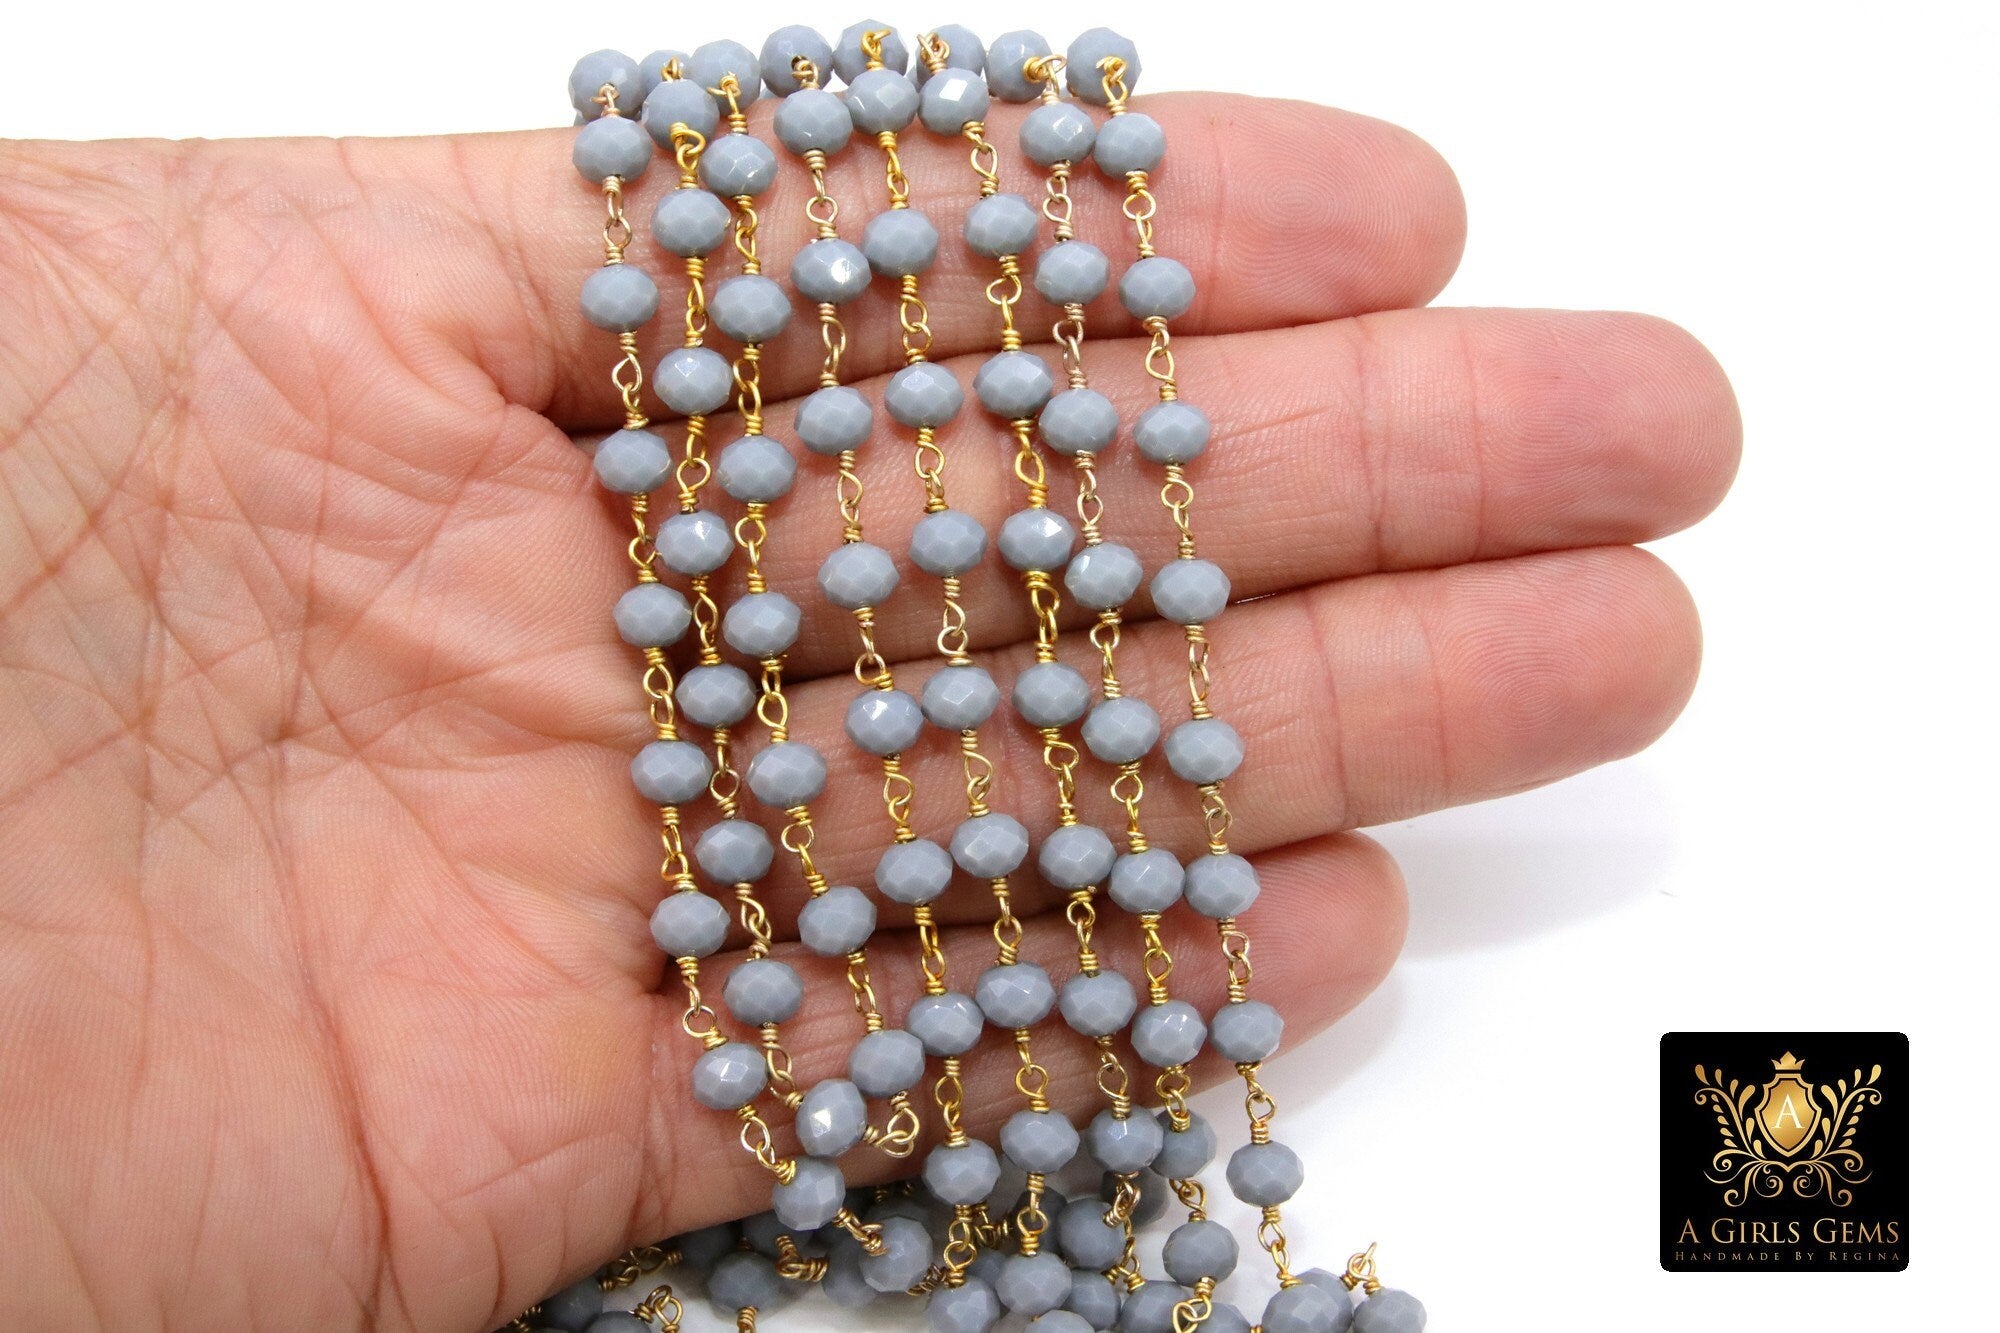 Slate Grey Beaded Rosary Chain, 6 mm Rondelle Crystal Gold Wire Wrapped CH #514, Unfinished Boho Jewelry Chain